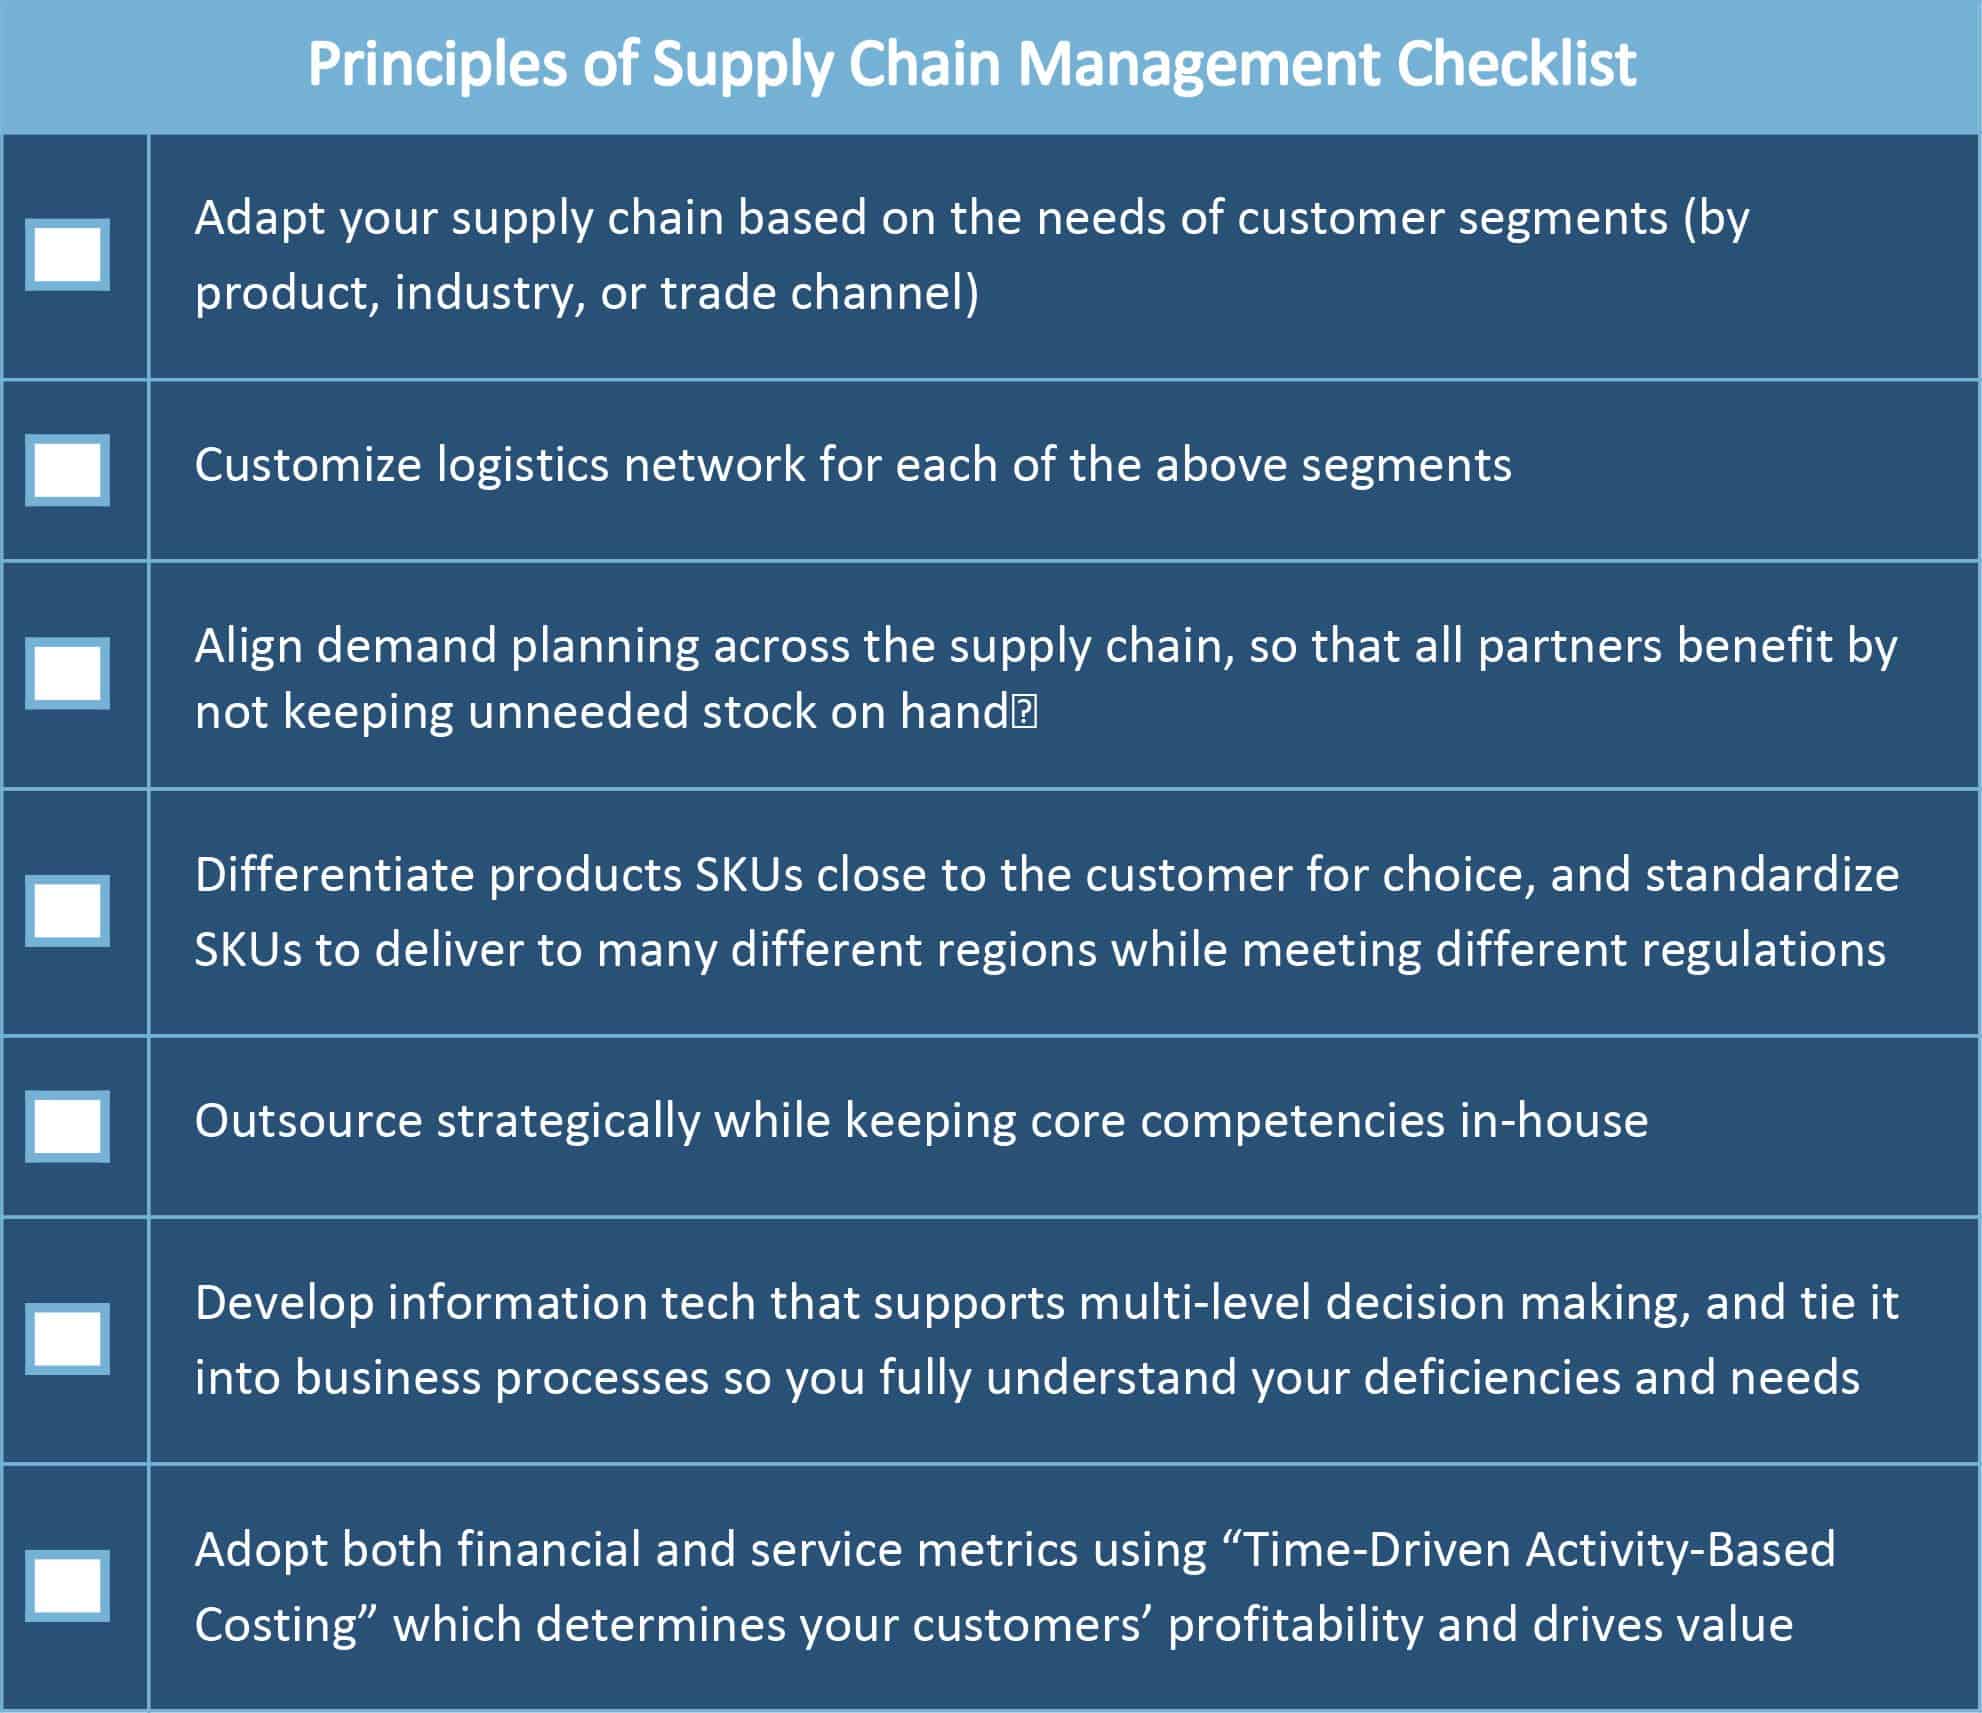 Principles of supply chain management checklist